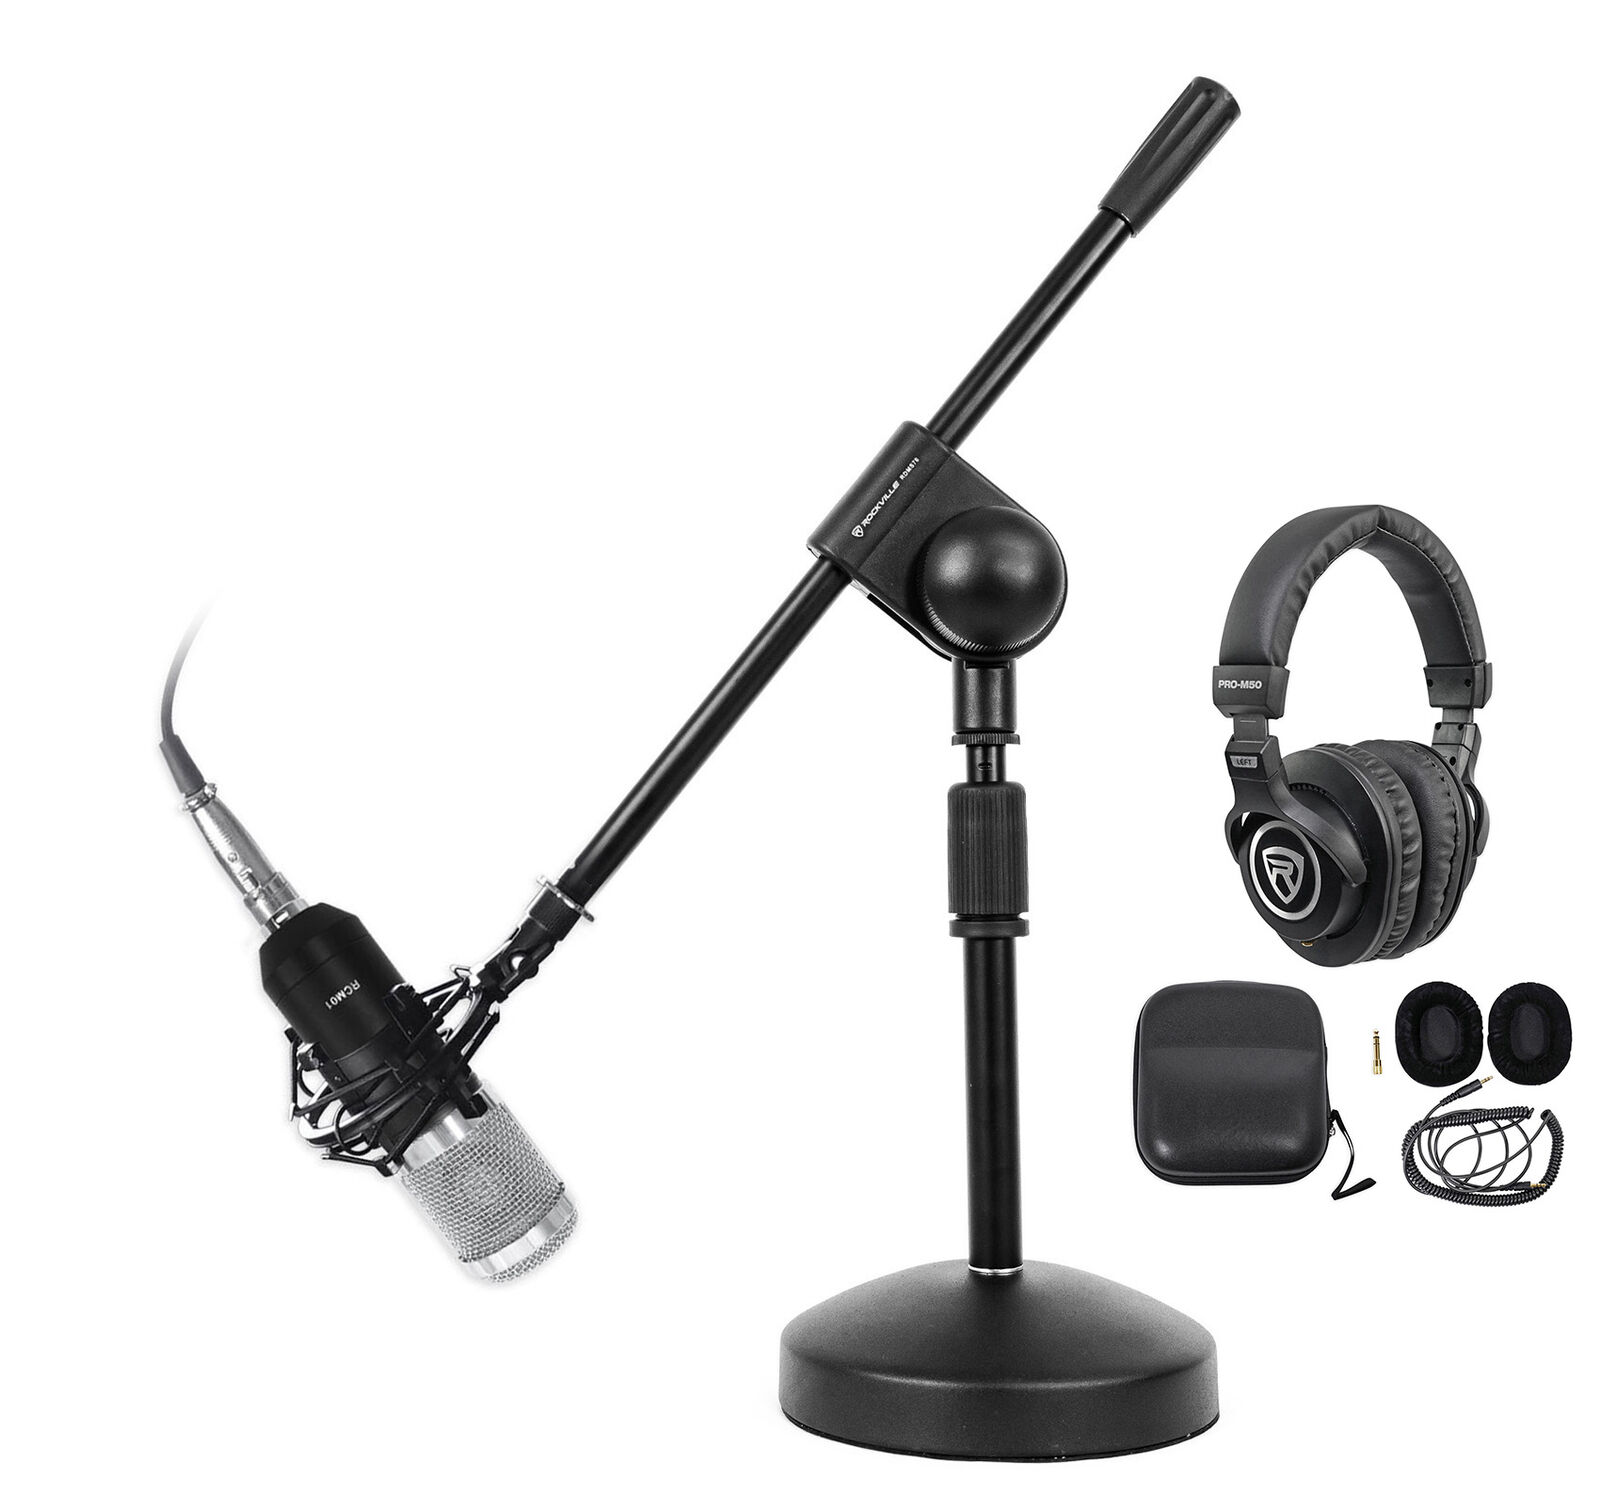 Rockville Pc Gaming Streaming Twitch Bundle: Rcm01 Microphone+headphones+stand